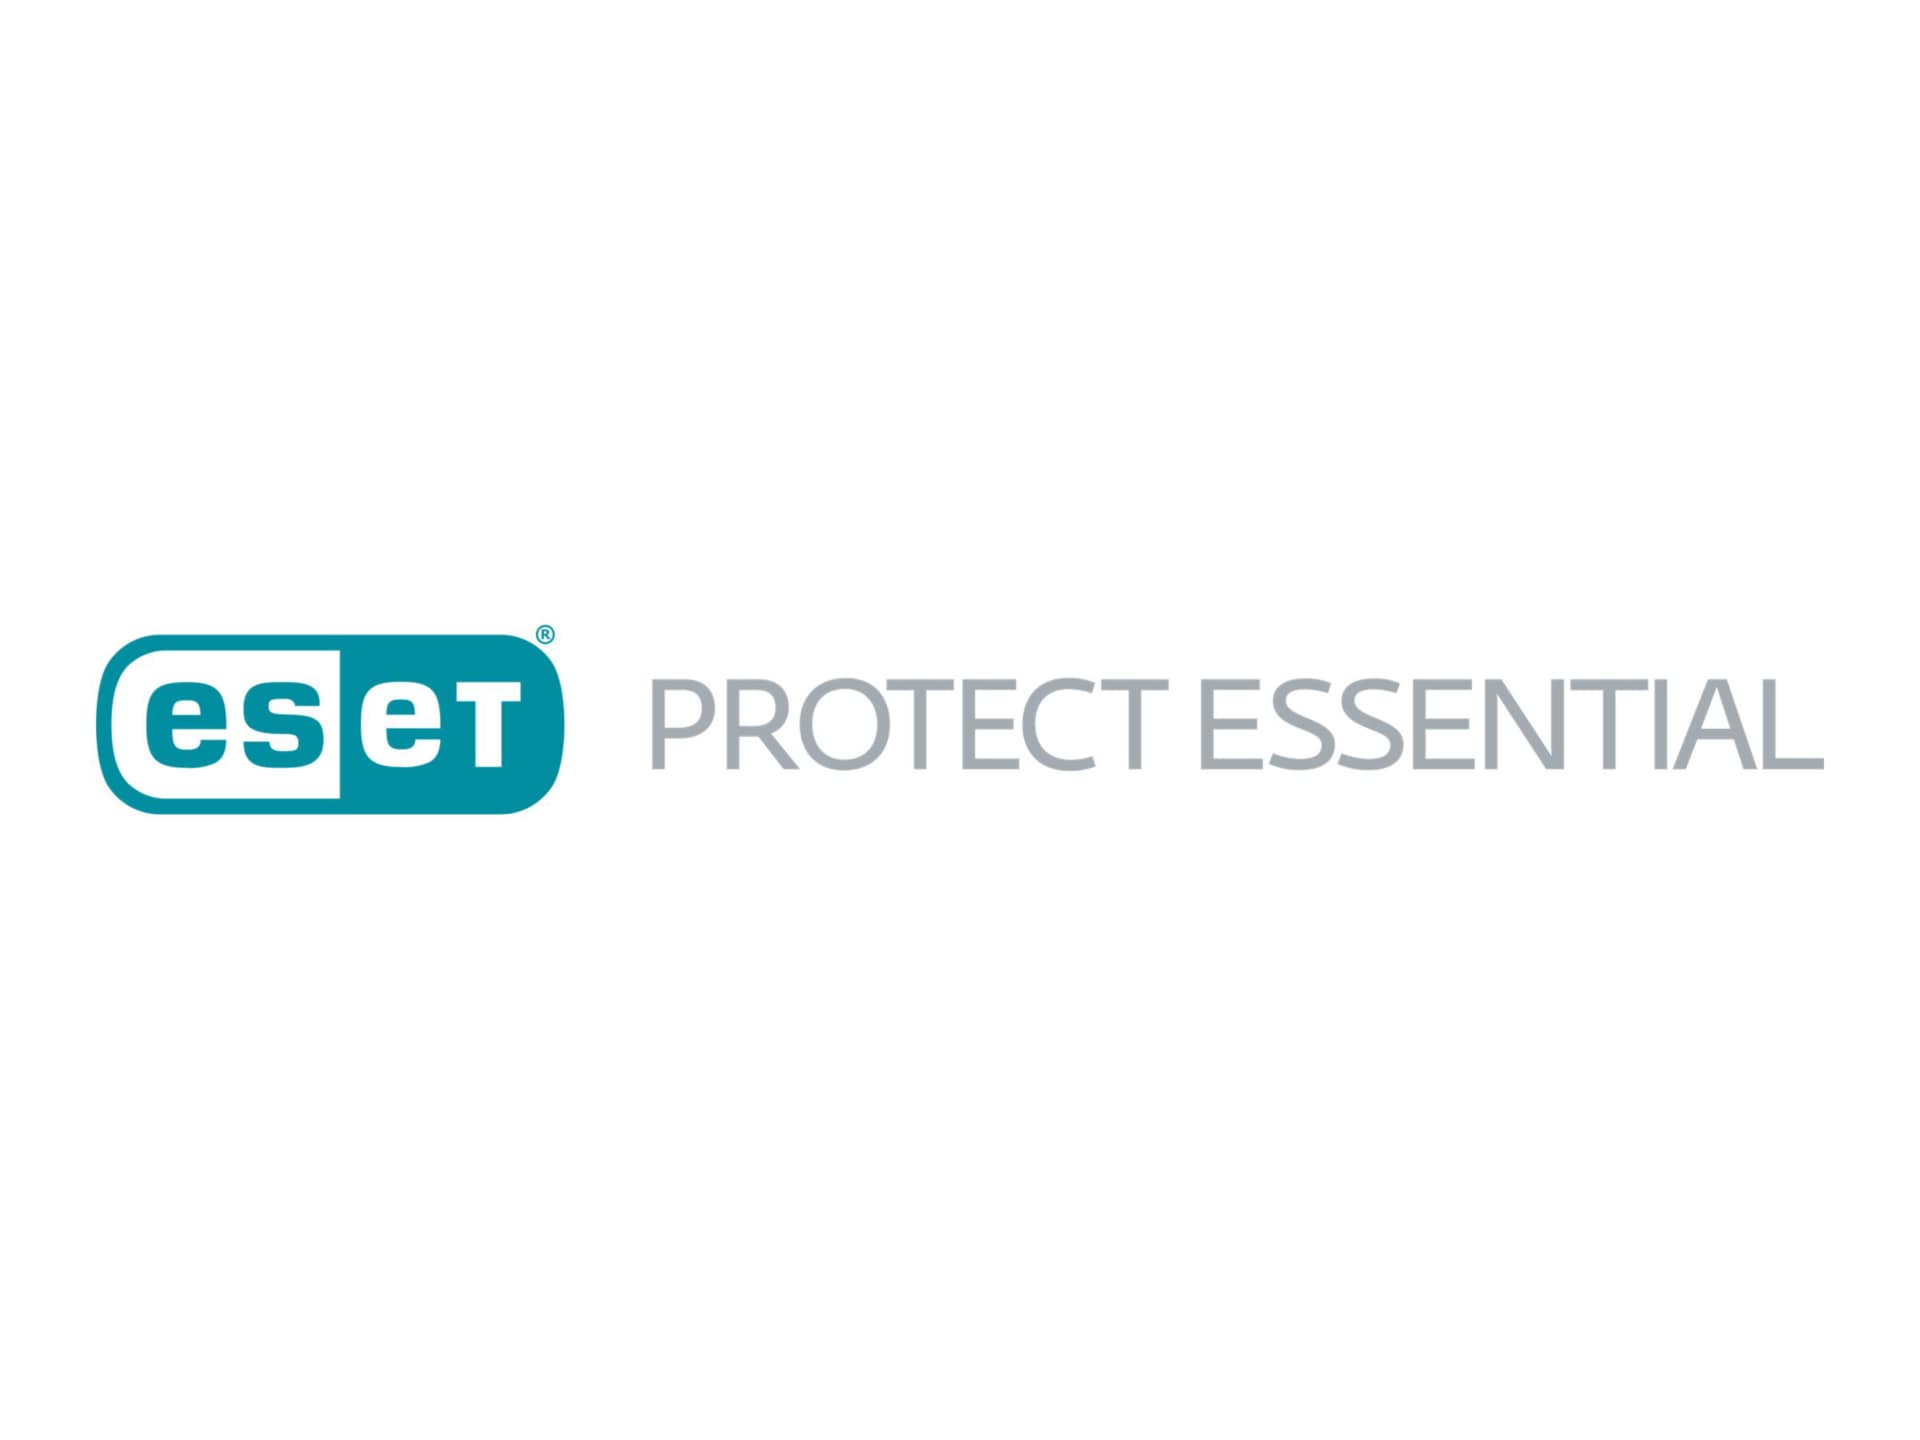 ESET PROTECT Essential Plus - subscription license renewal (3 years) - 1 seat